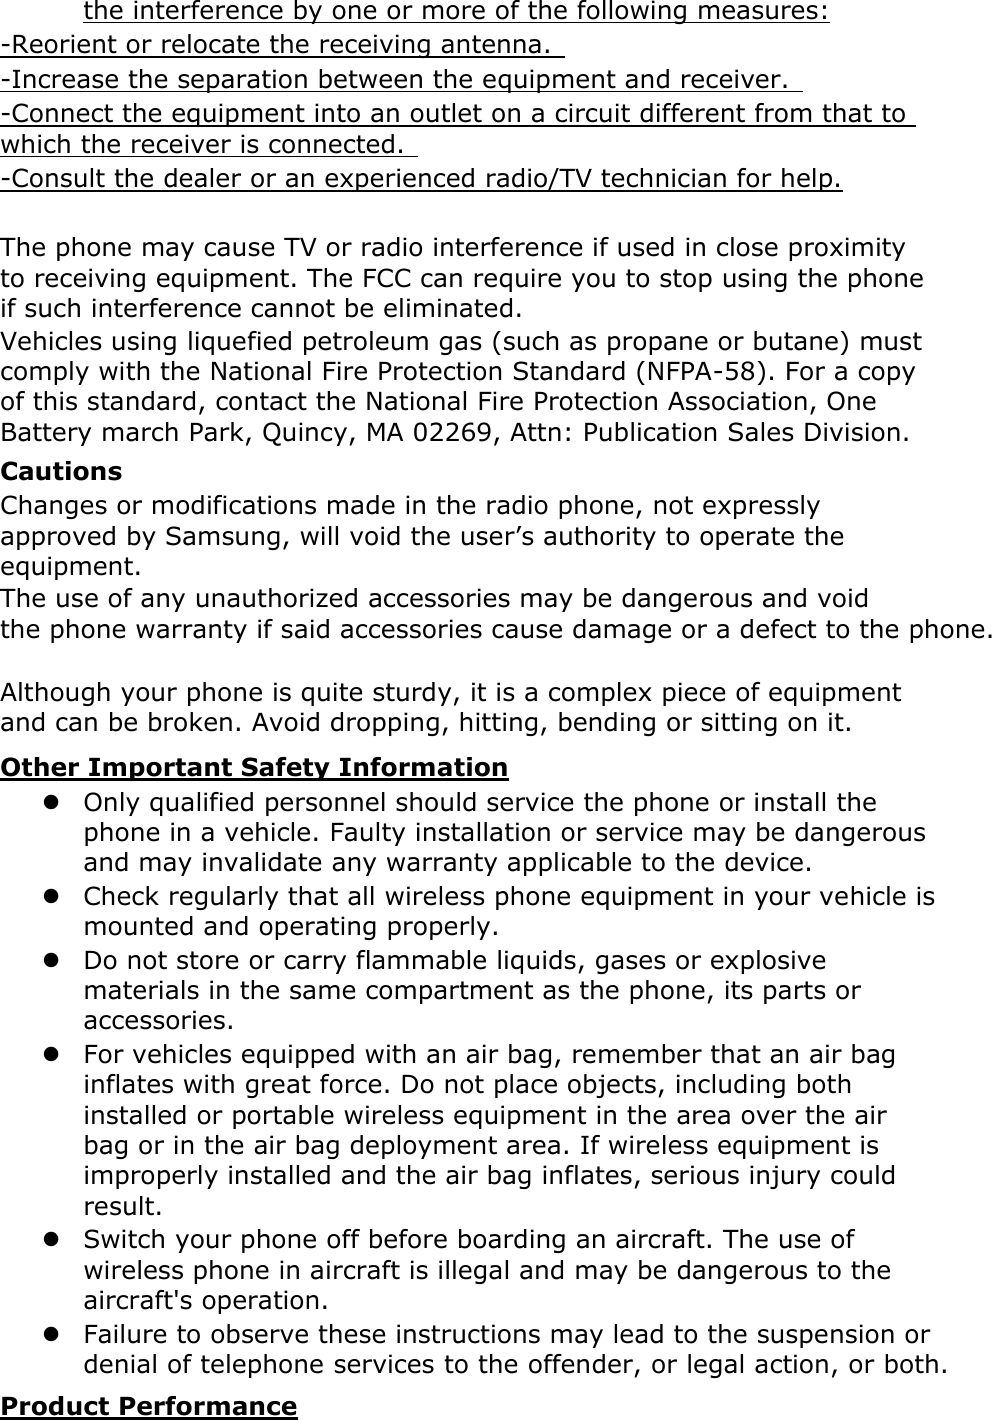 Page 17 of Samsung Electronics Co GTI8350 Cellular/ PCS GSM/ EDGE Phone with WLAN and Bluetooth User Manual